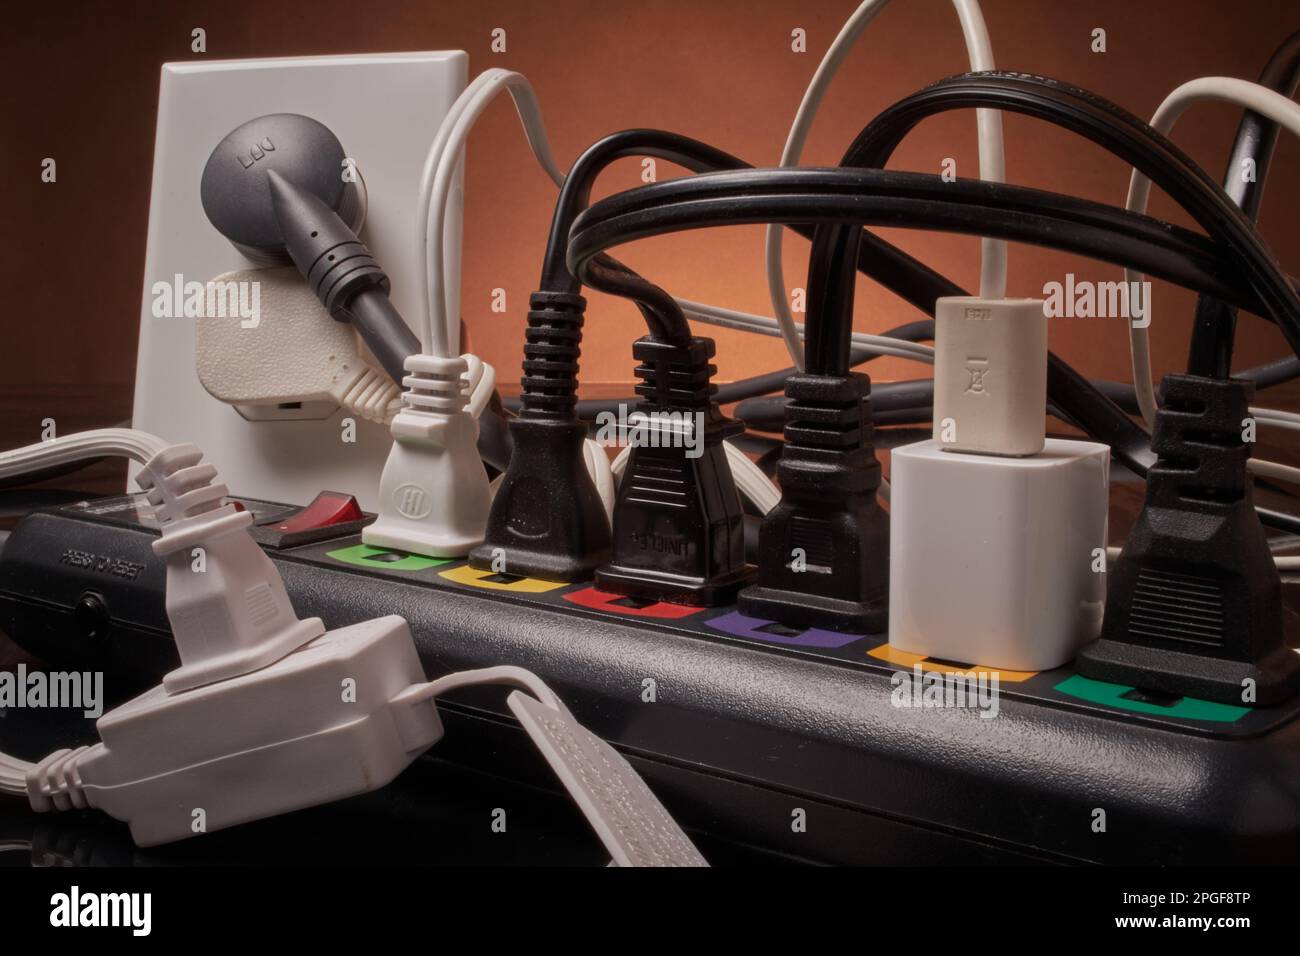 Electrical outlets and power strip overloaded beyond capacity Stock Photo